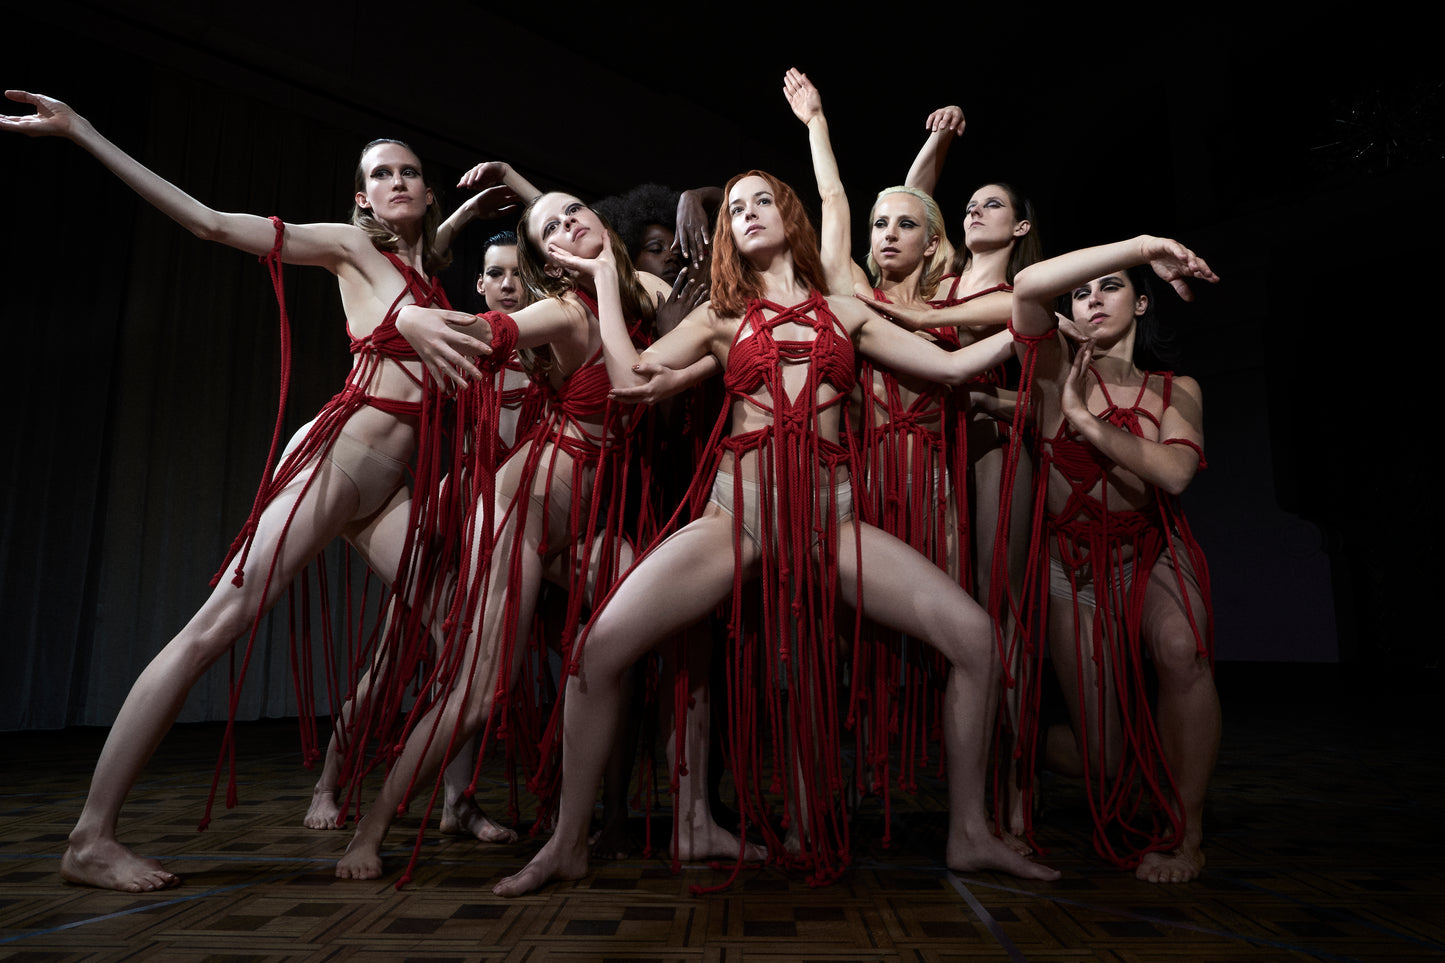 Suspiria Rope Dress Bundle - Special Offer with The Duchy